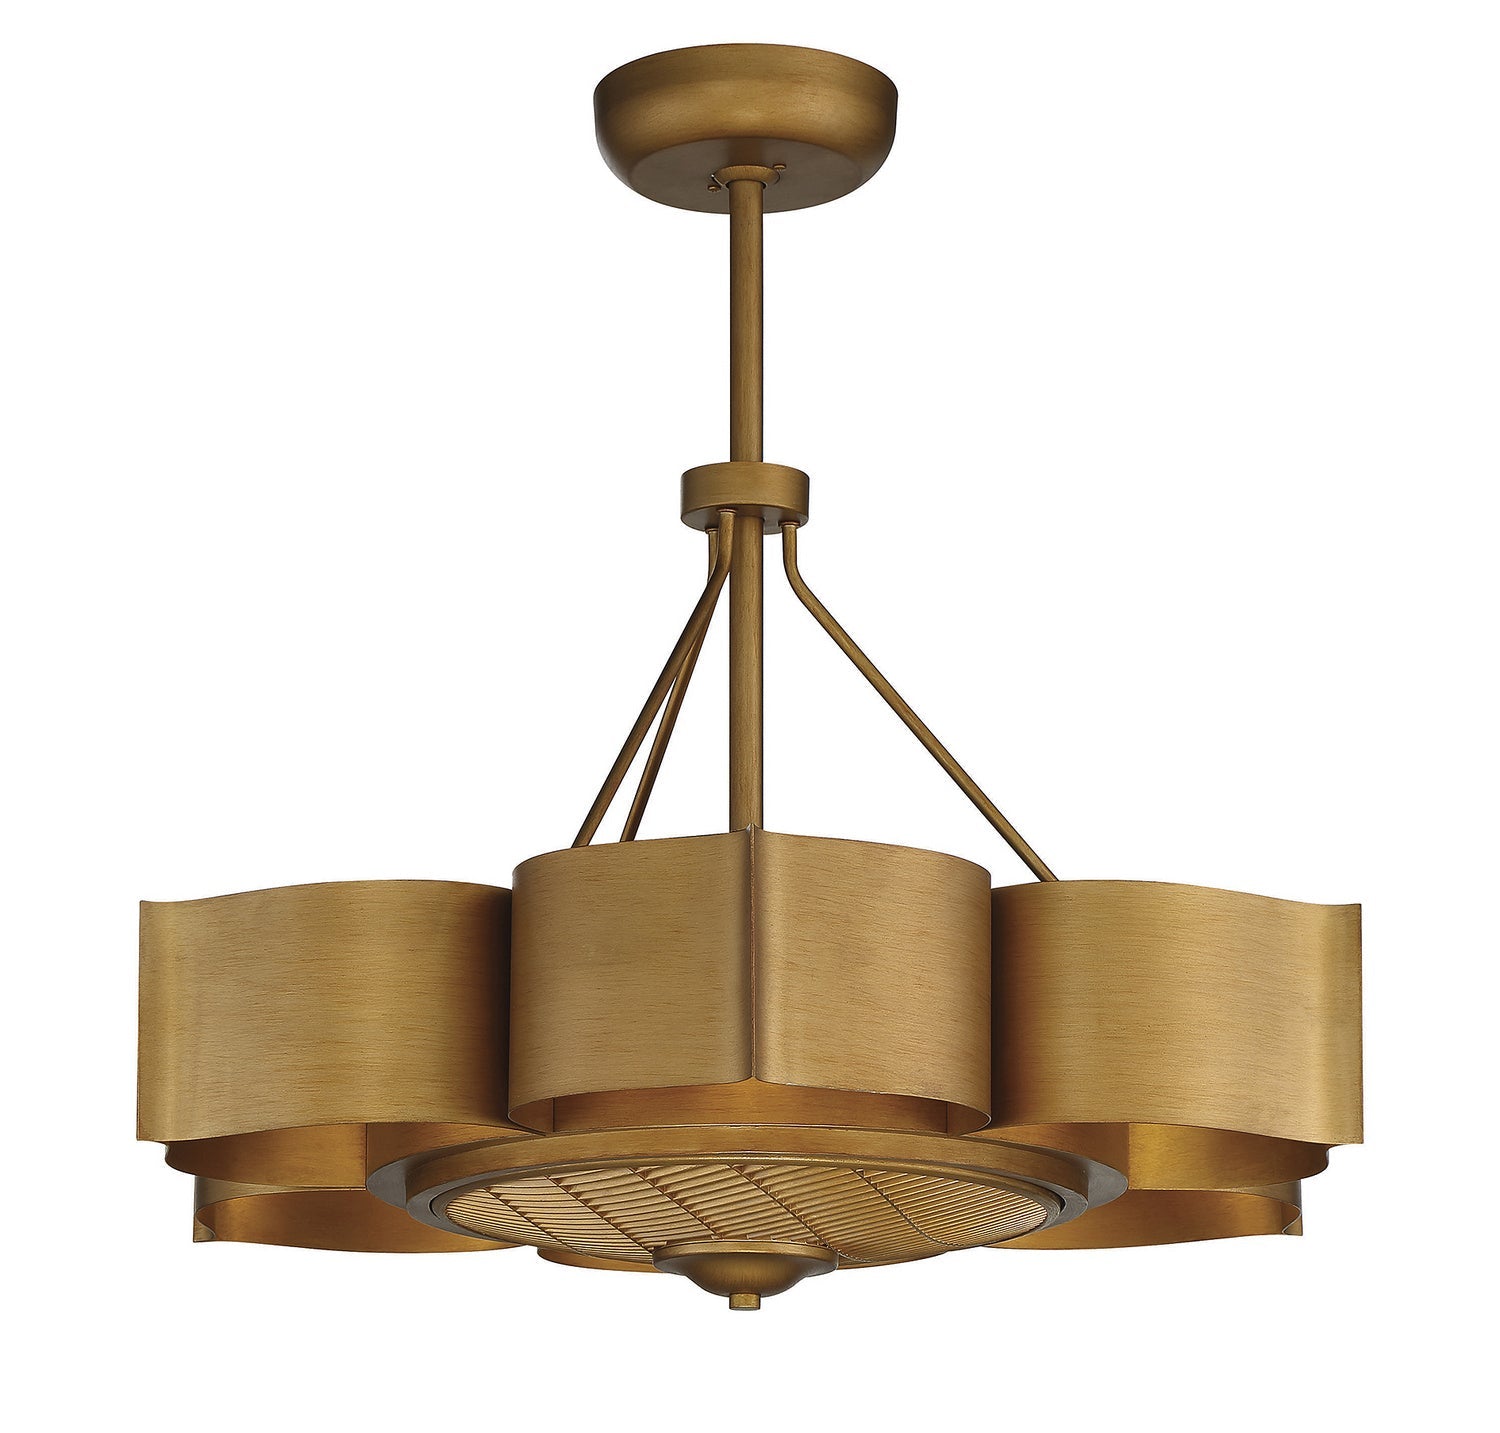 Savoy House Stockholm 39-FD-125-54 Ceiling Fan 12 - Gold Patina, Gold/